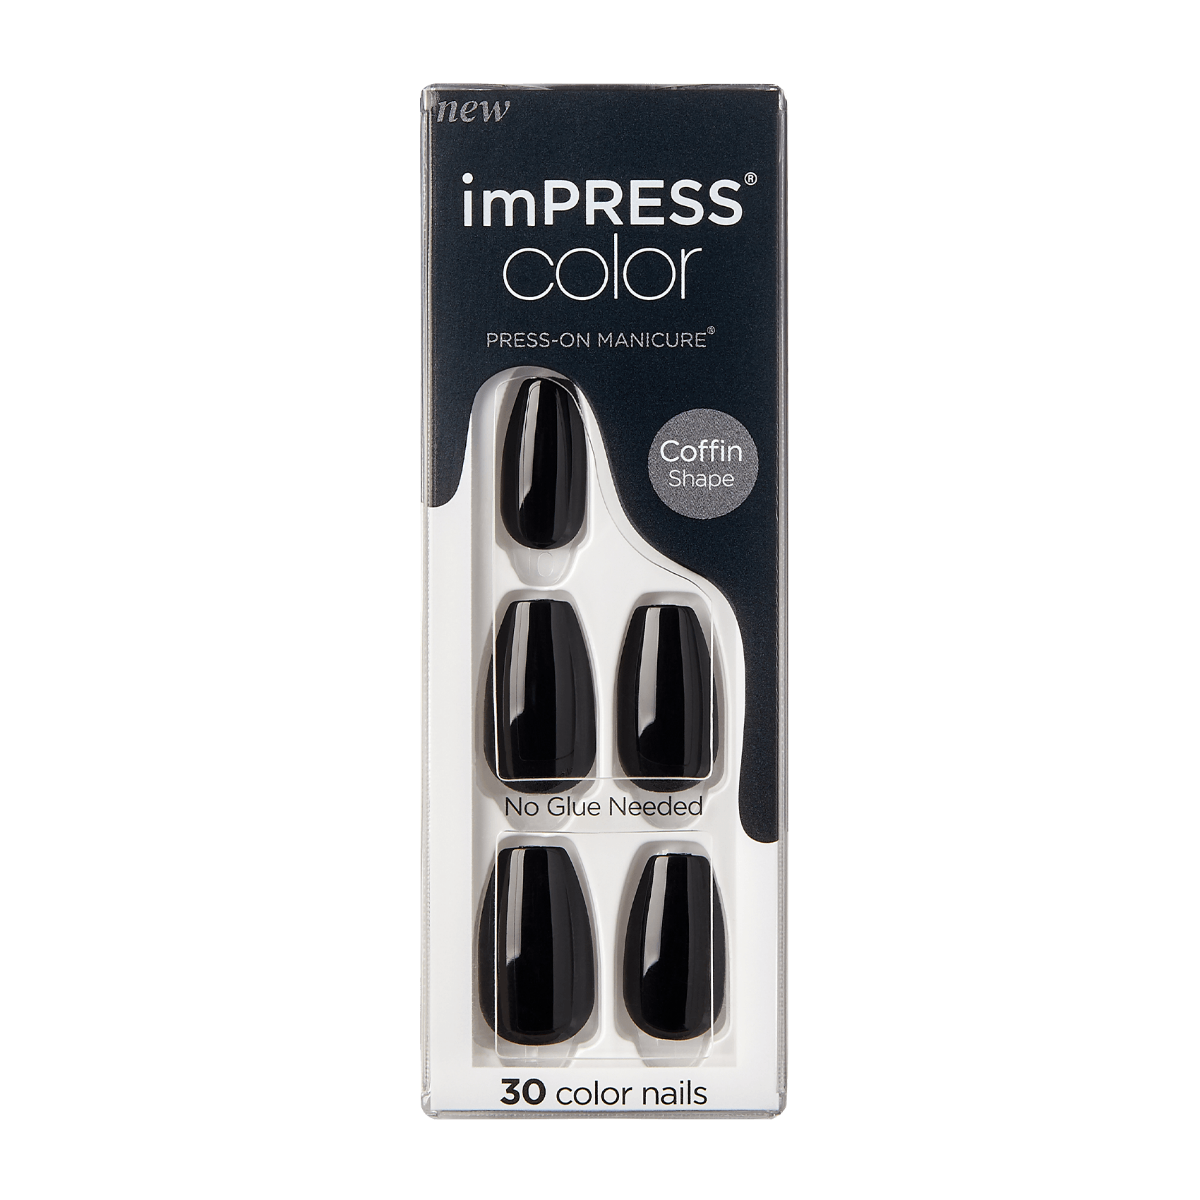 KISS ImPRESS Color Press-On Manicure - All Black - Taille M